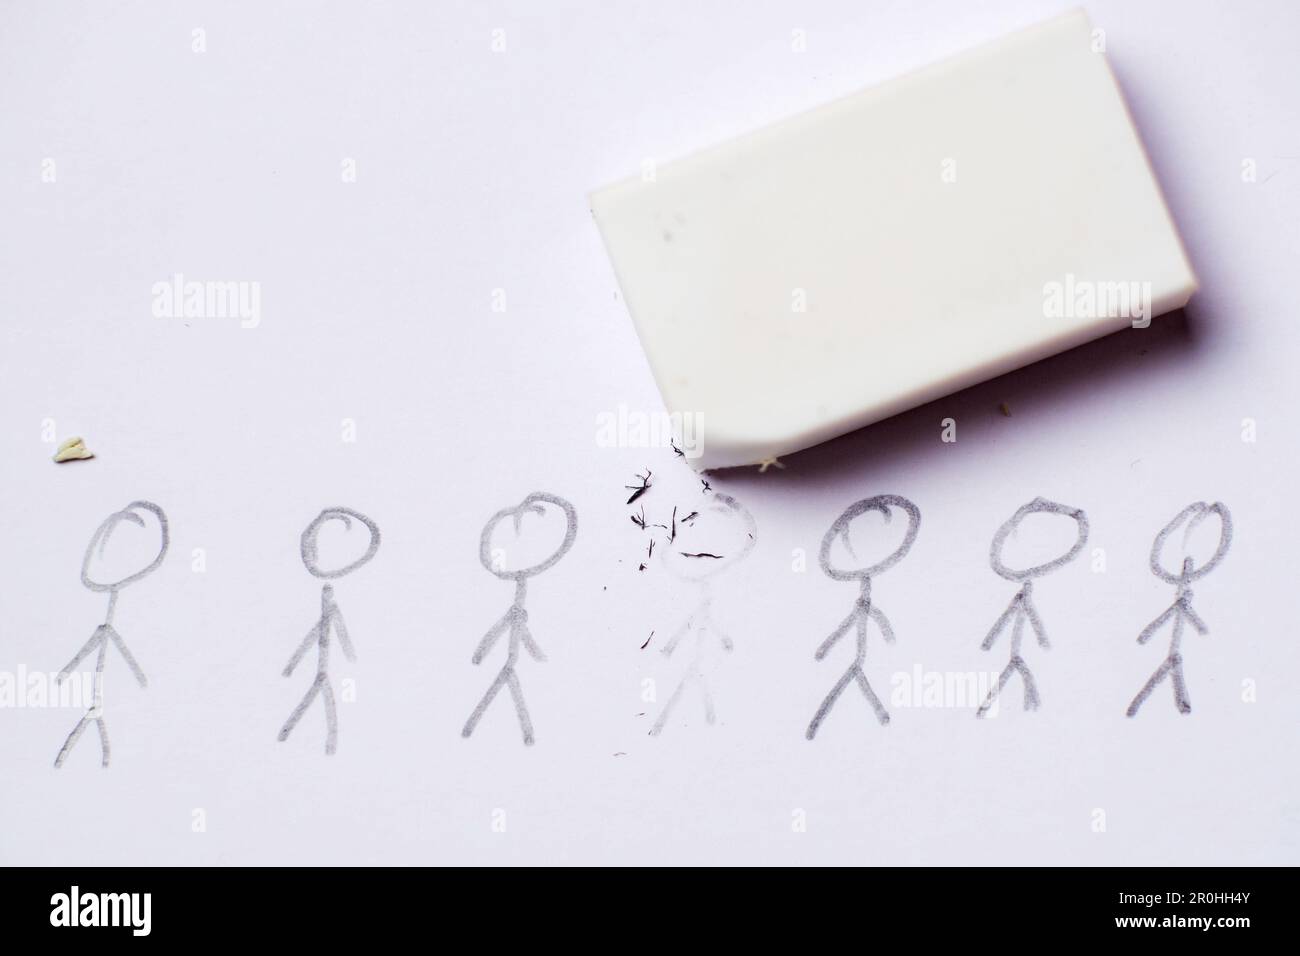 Cancellation culture concept. The drawn figure of a person is erased with an eraser. Stock Photo